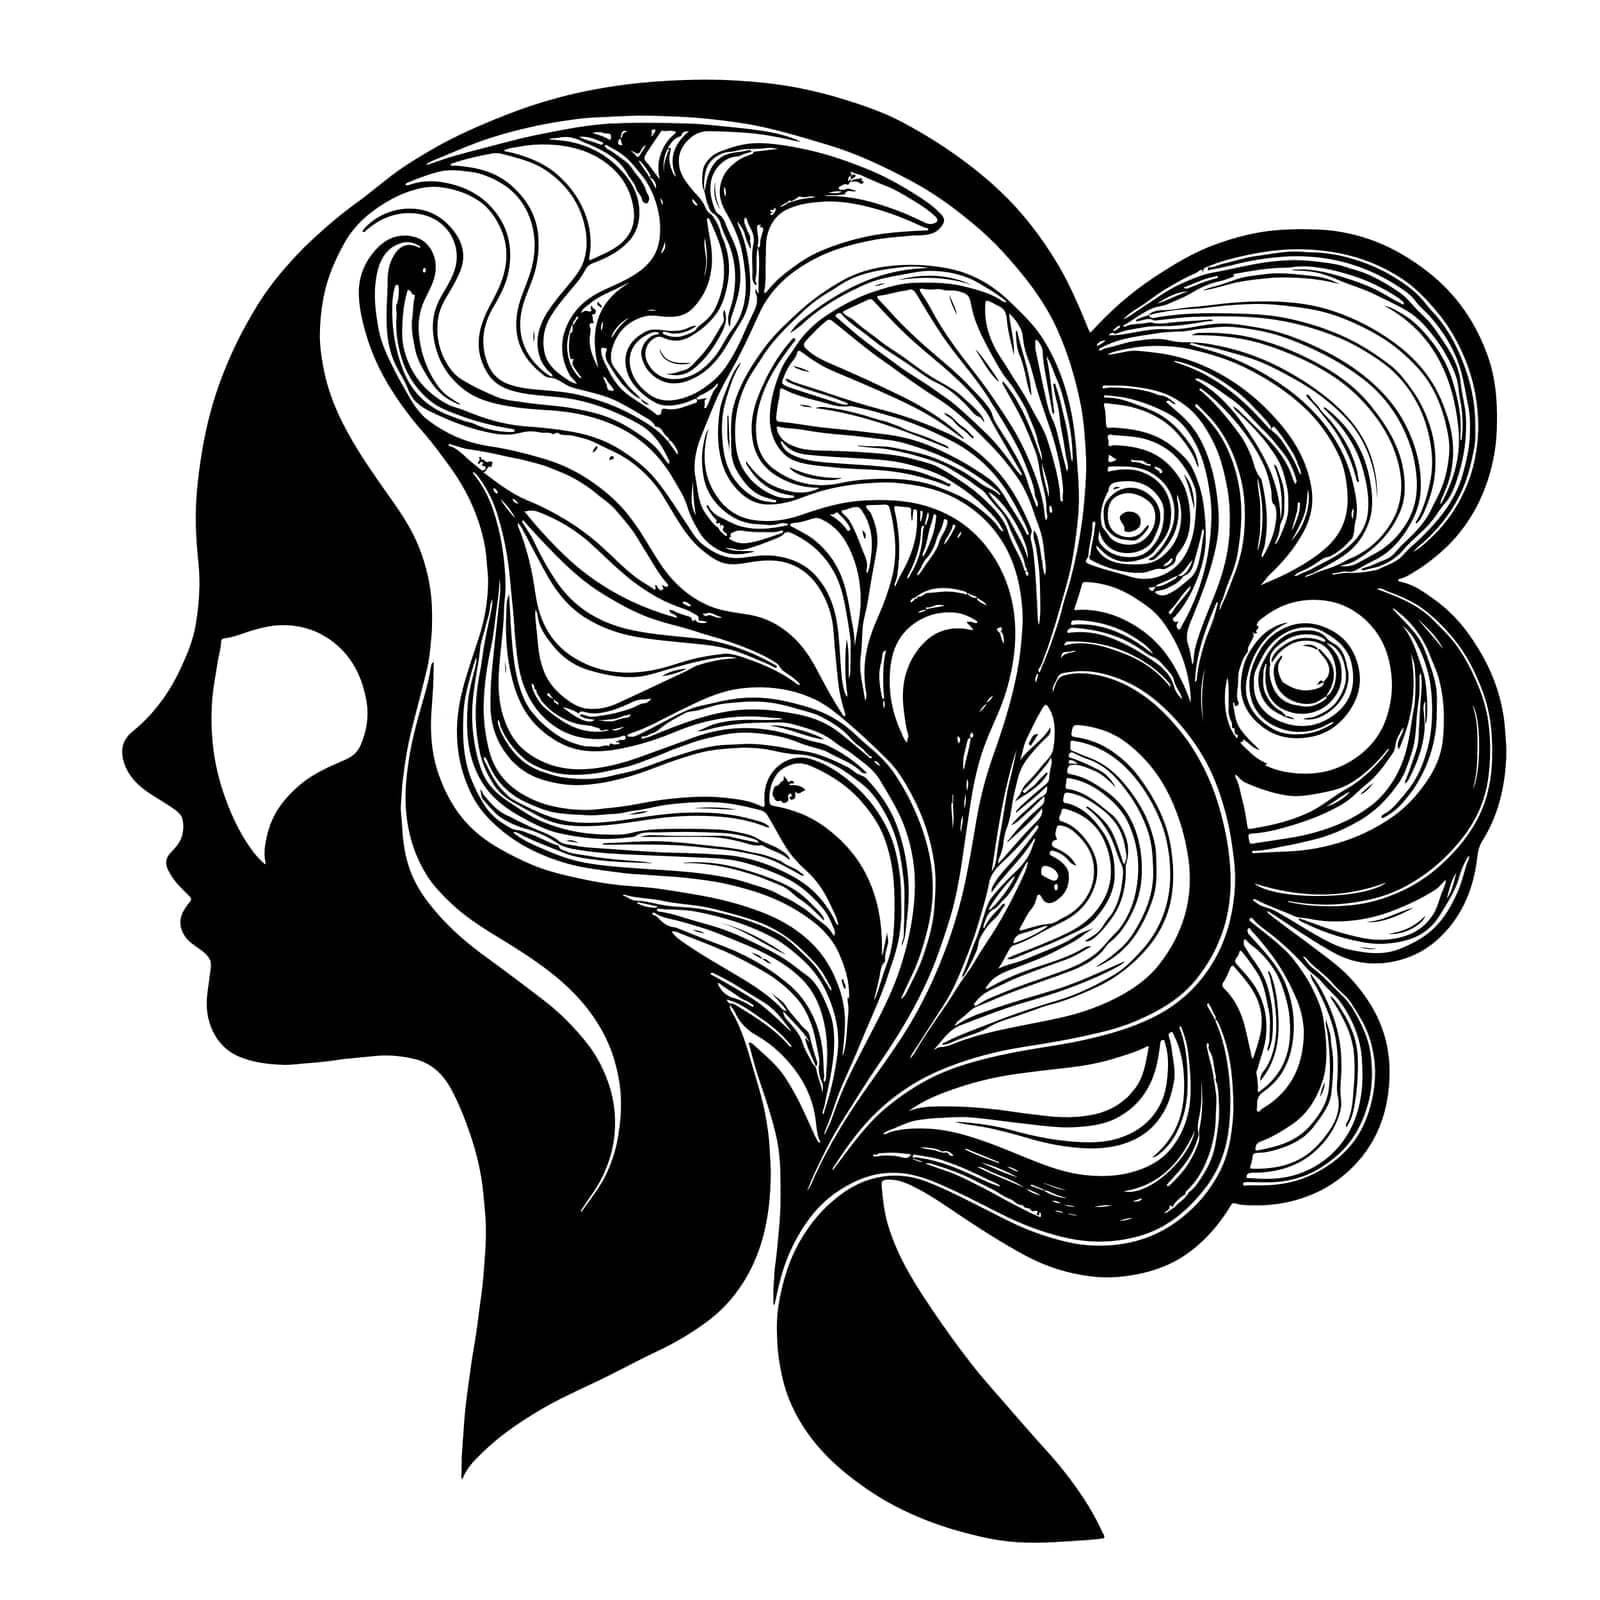 Sketch of Female profile silhouette. Art hairstyle black and white design